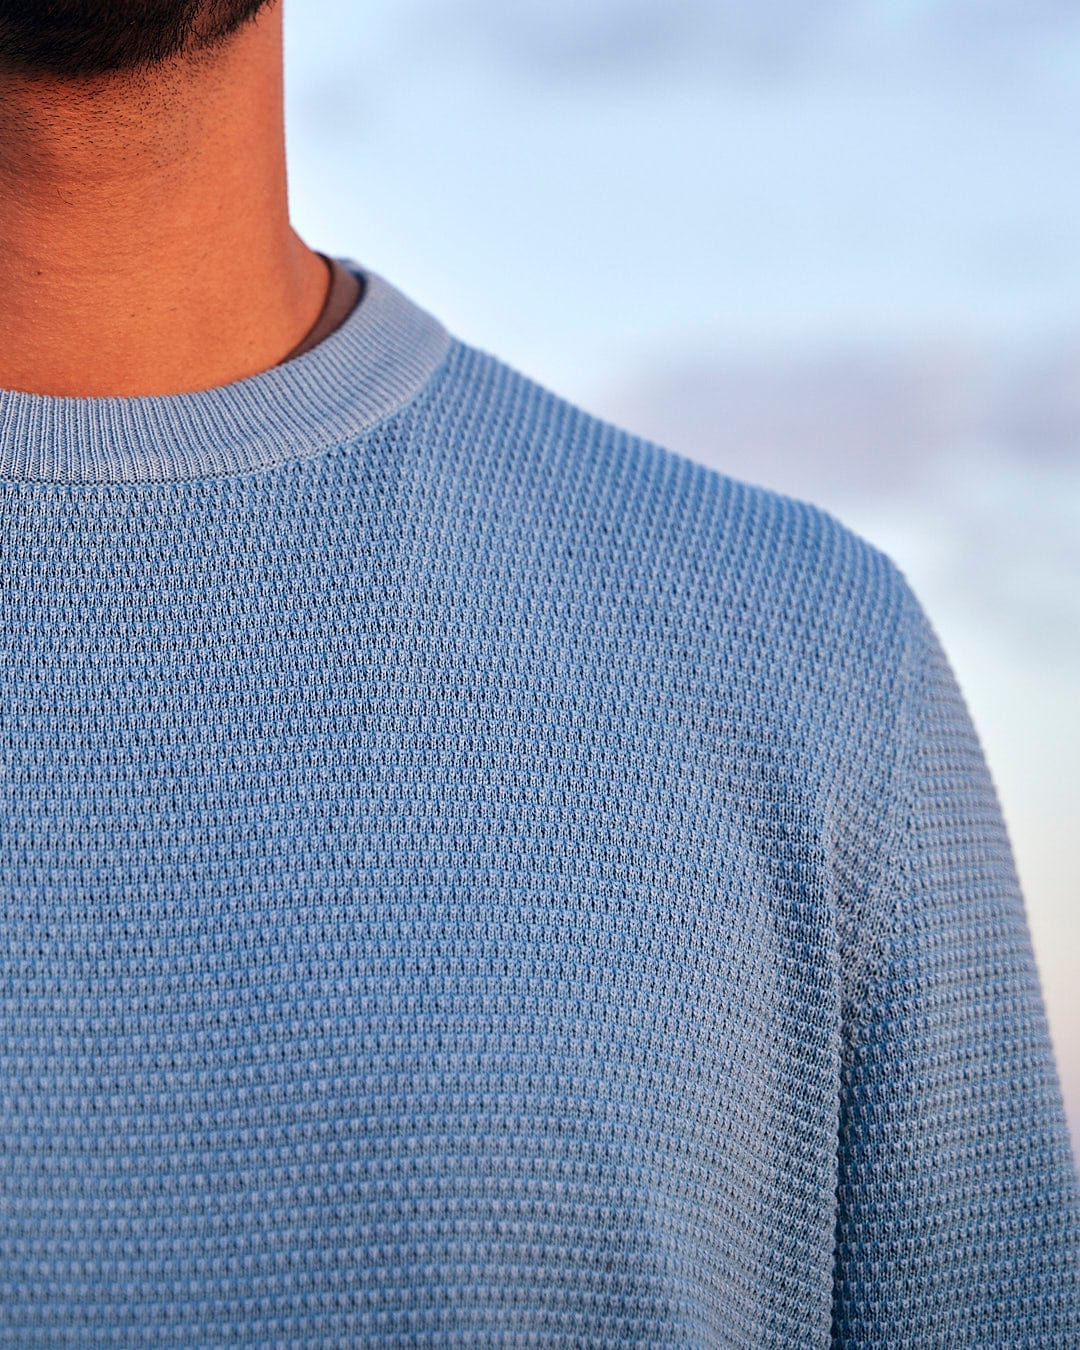 A close up of a man wearing the Saltrock Moss - Mens Washed Knitted Crew - Light Blue sweater.